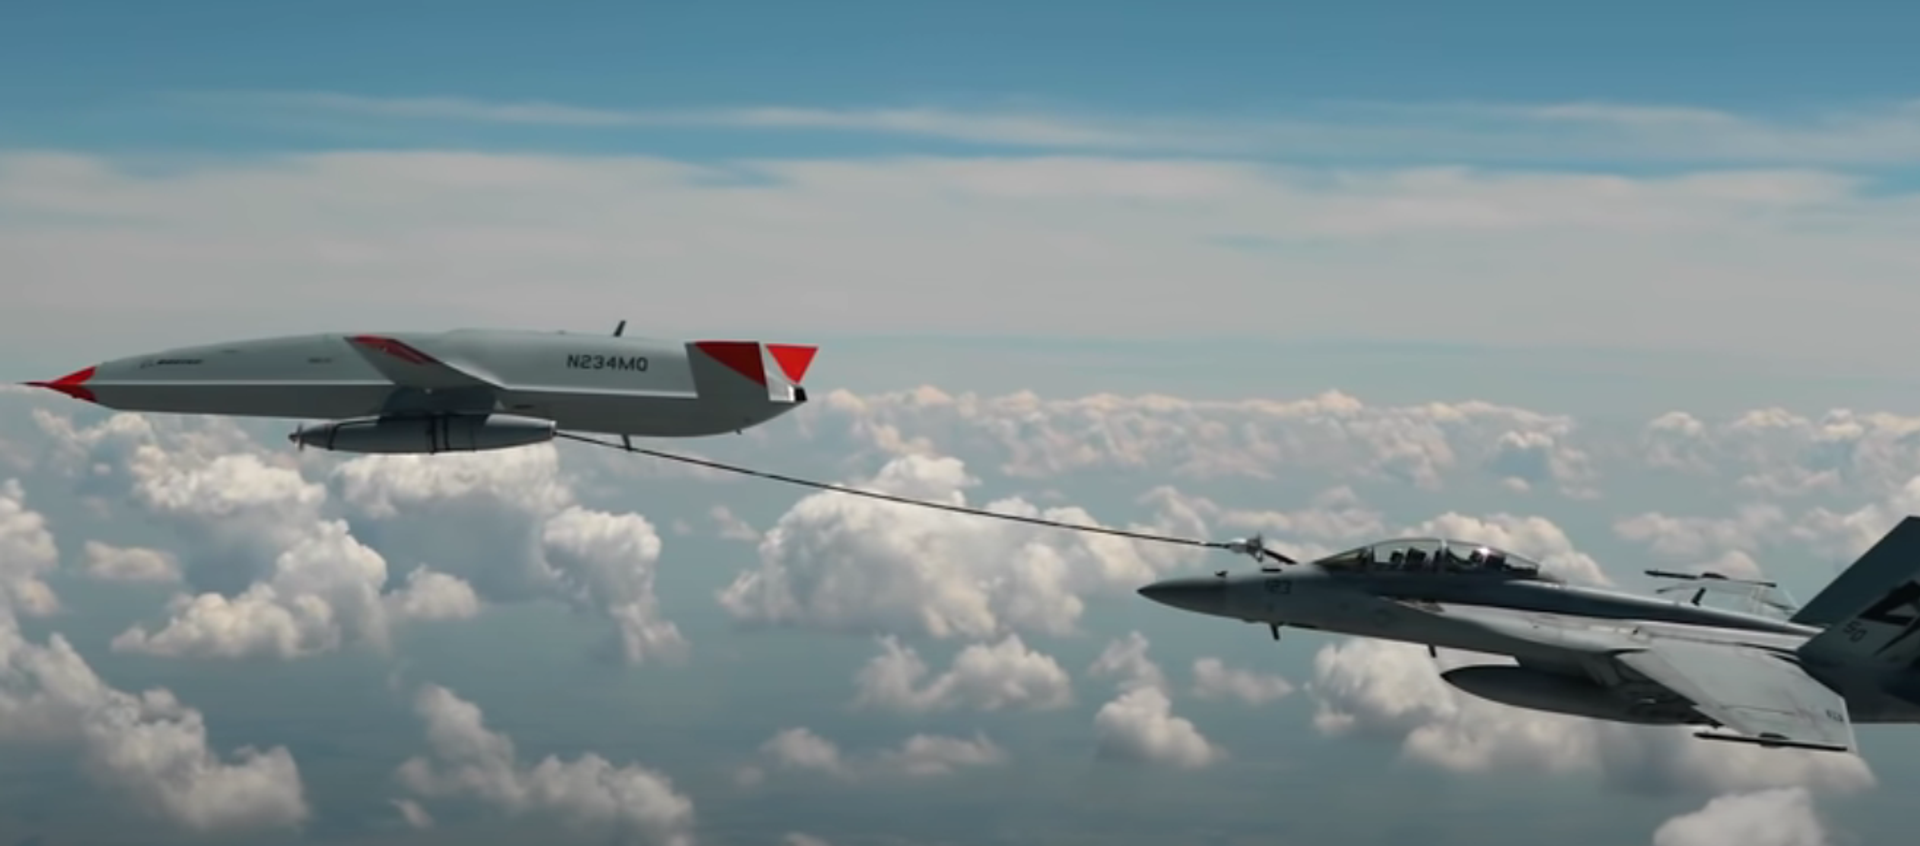 The MQ-25 T1 test asset has flown into the history books as the first unmanned aircraft to ever refuel another aircraft - piloted or autonomous - during flight. During this June 2021 flight test, the #MQ25 T1 test asset transferred fuel to an F/A-18 Super Hornet. After additional flight tests, this unmanned aerial refueling test asset will head to a U.S. Navy carrier for deck handling trials. - Sputnik International, 1920, 08.06.2021